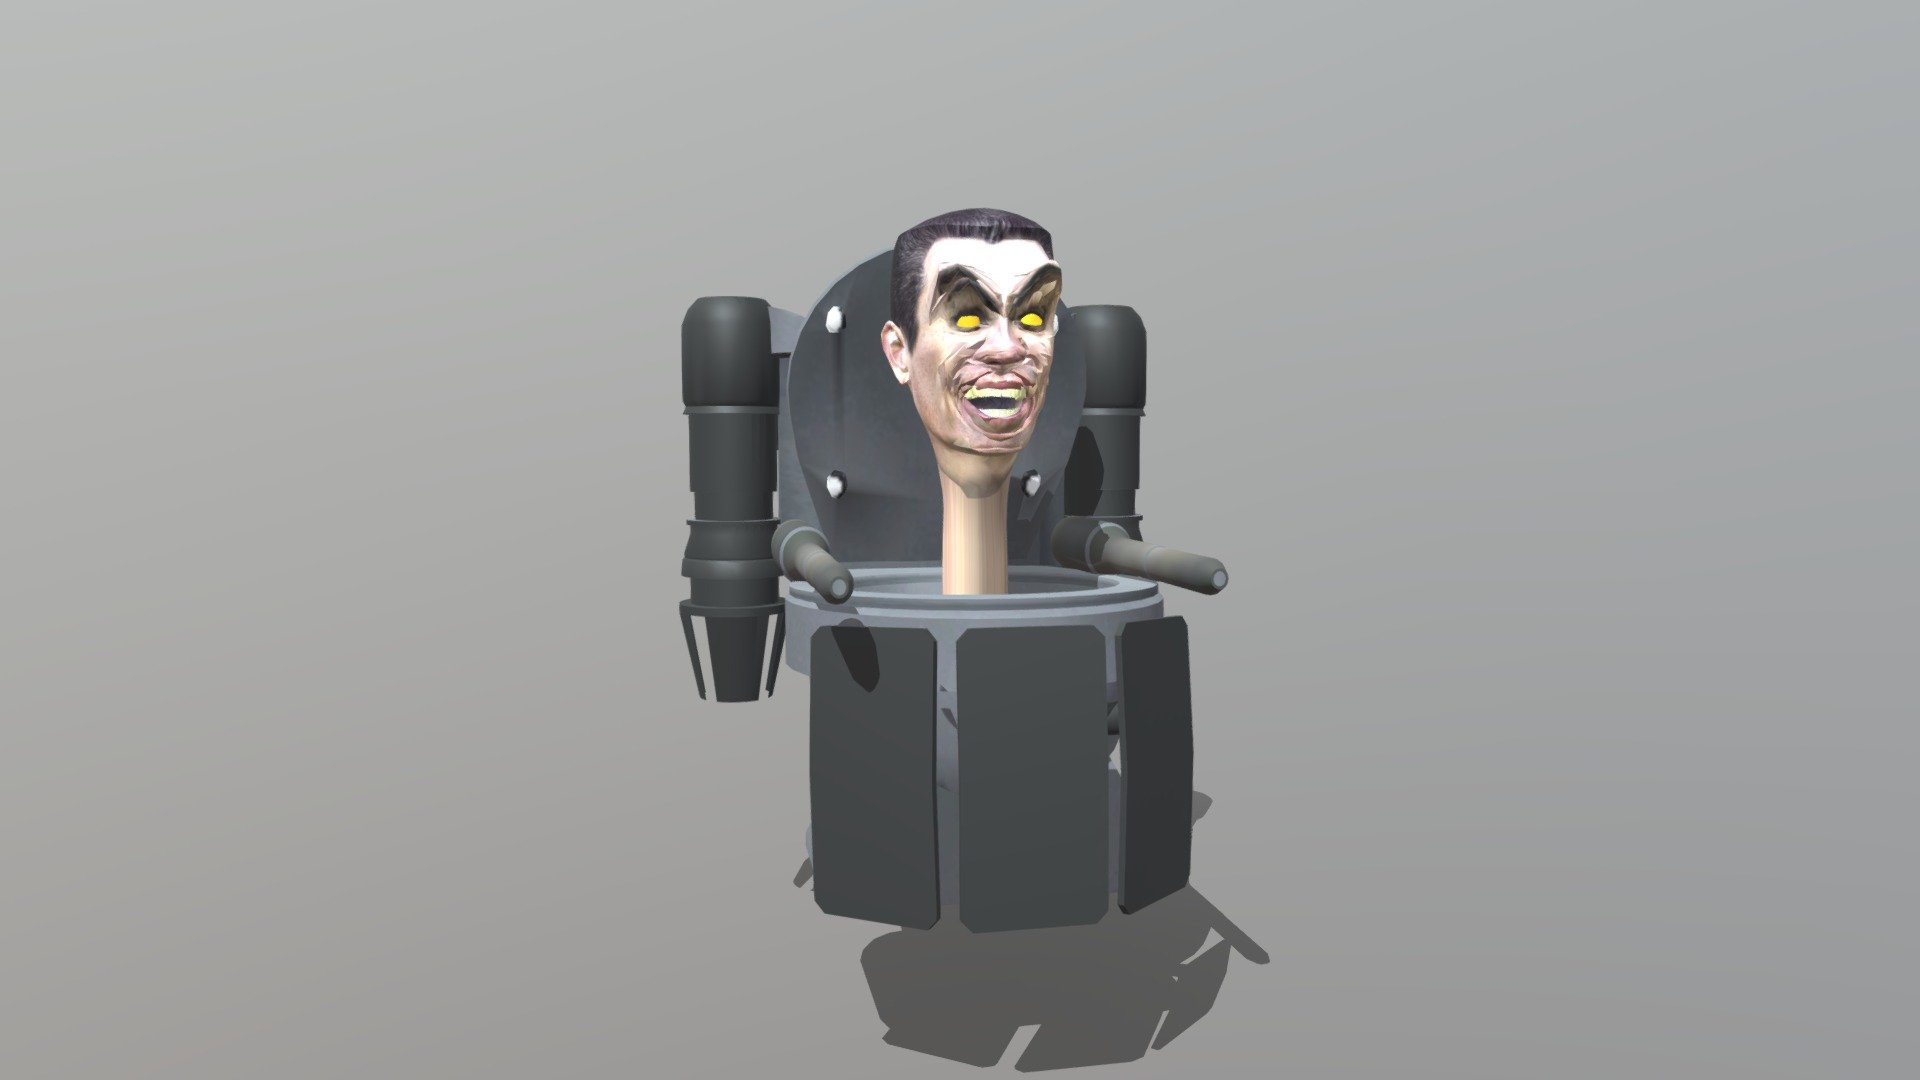 super cool MODEL GMAN very very very cool bro  u can use this is prisma 3d if u dont have blender your welcome i know yall looking for a gman upgraded 3d model in sketchfab so i make one and make it free theres a person that has created gman upgraded too but u cant buy it so yeah this one is for the people! - Skibidi toilet gman upgraded - Download Free 3D model by Gigaboysigma 3d model